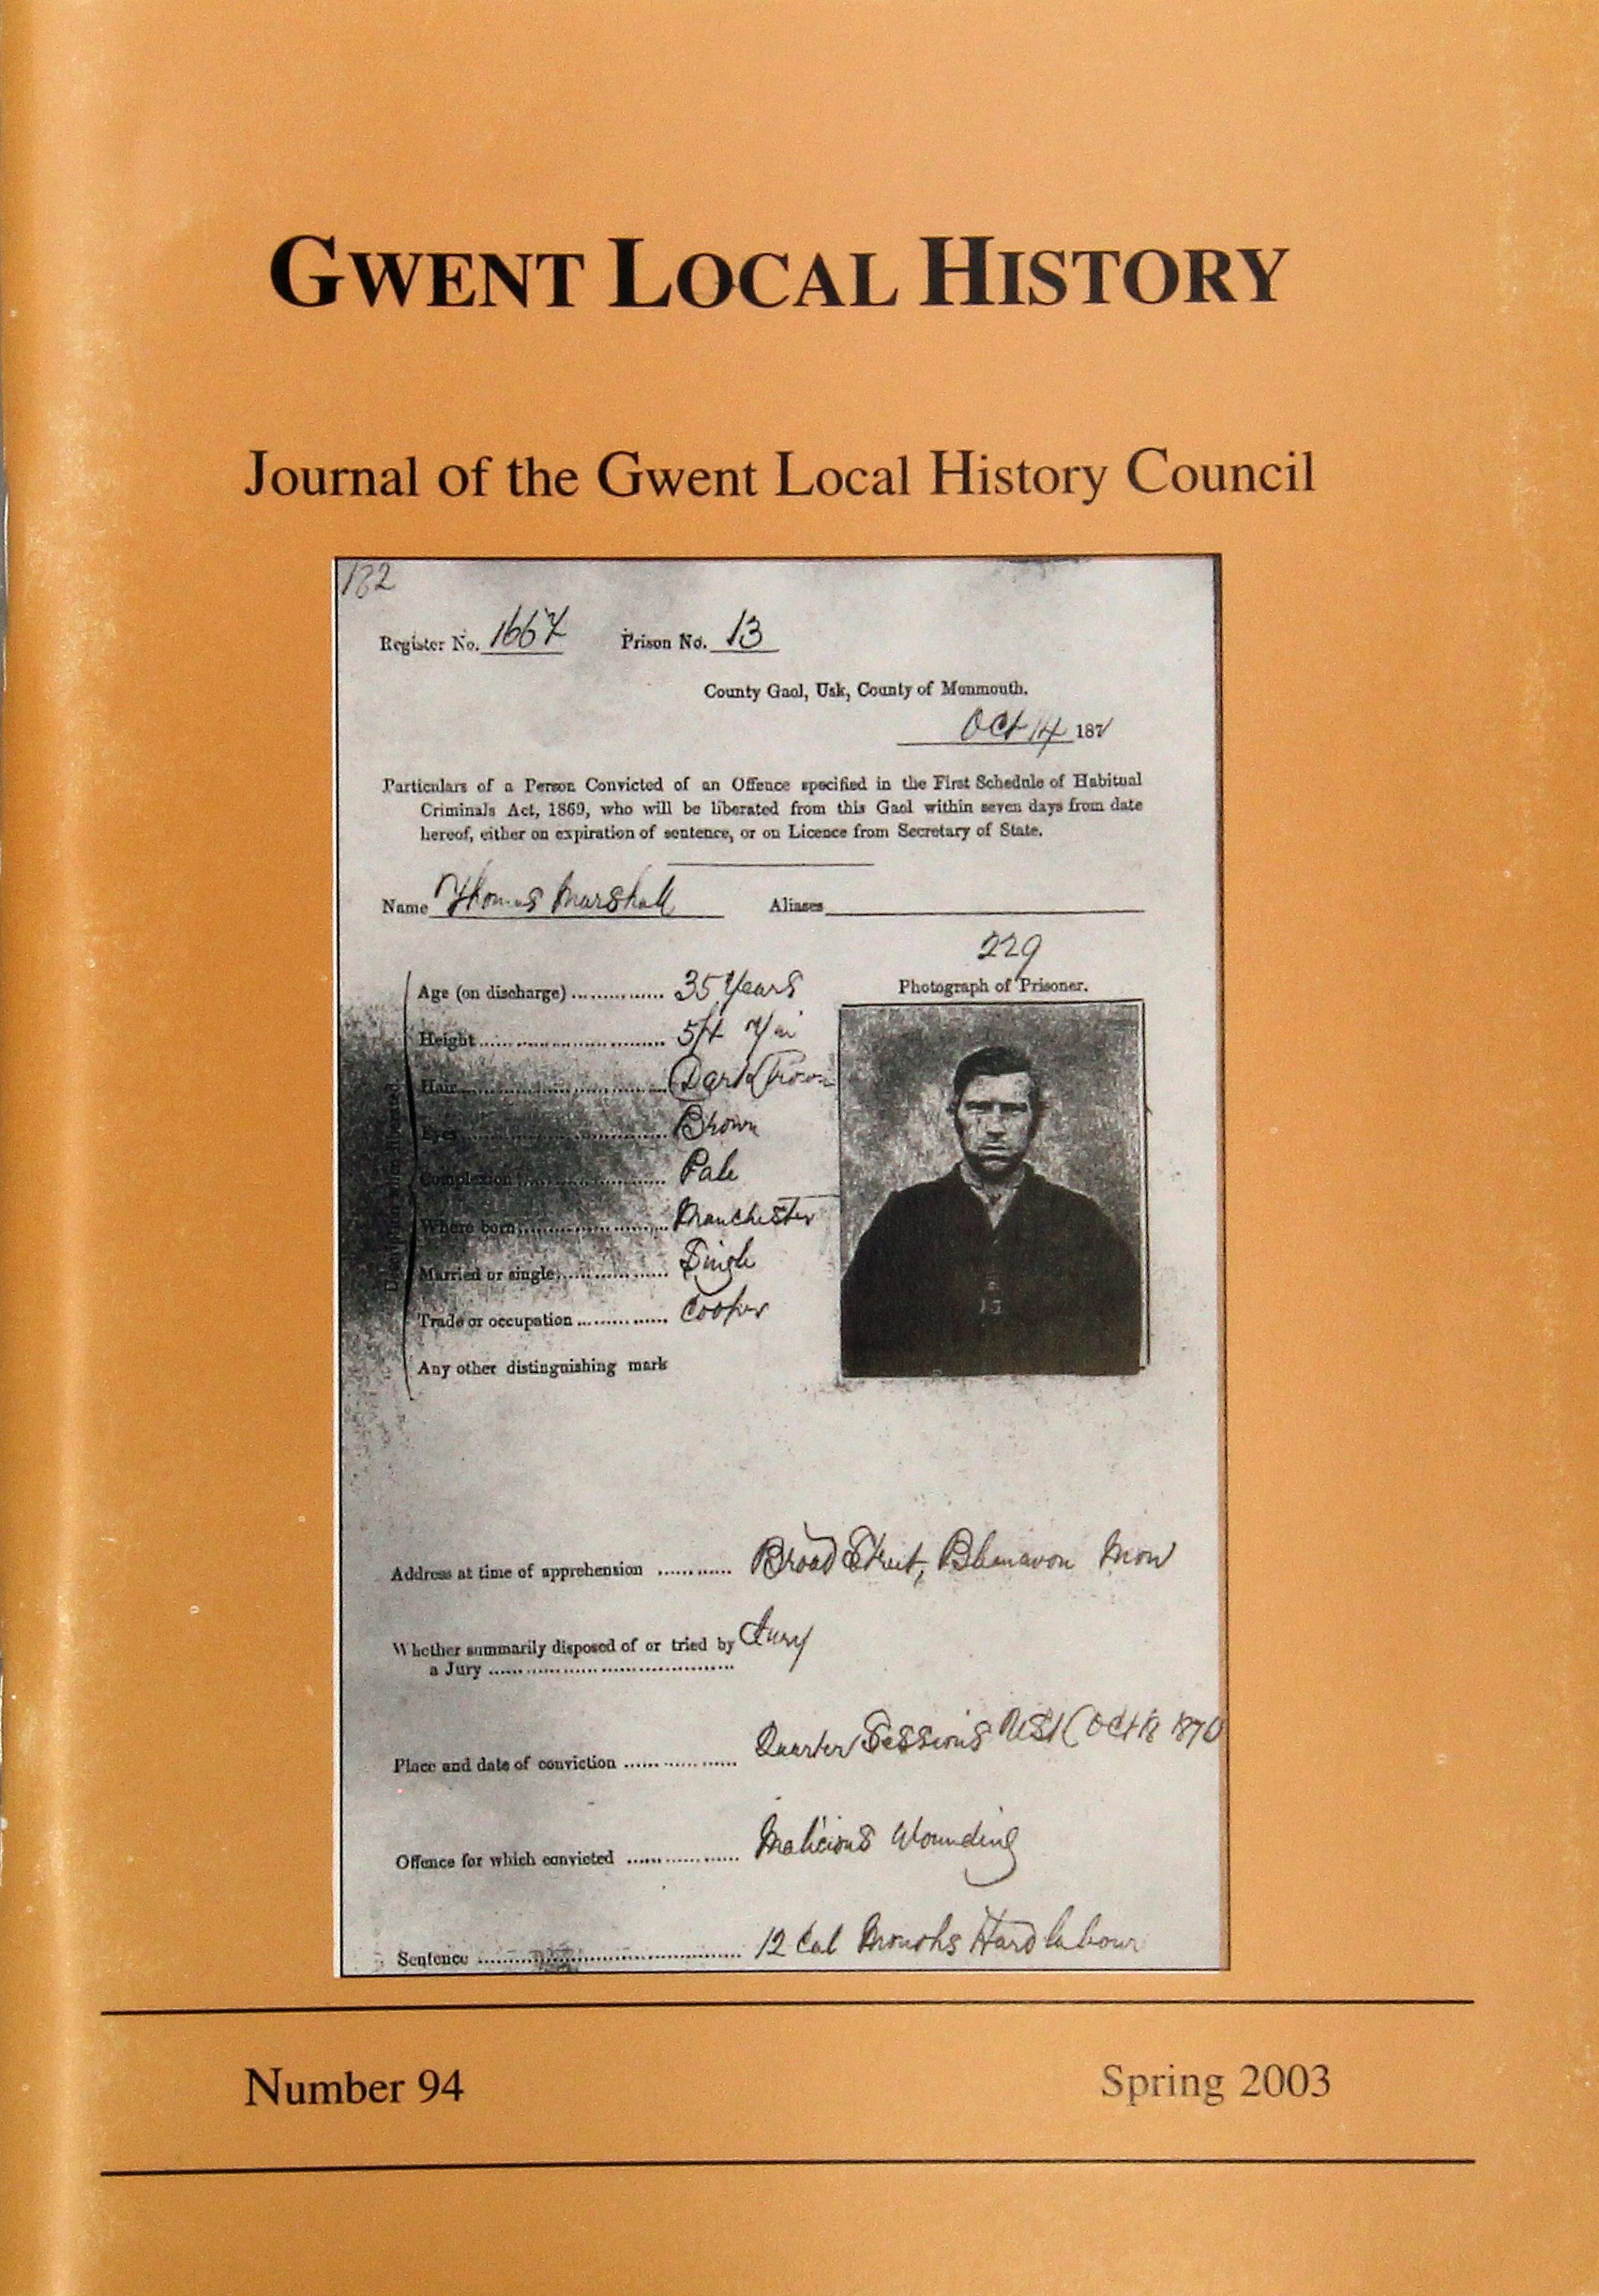 Gwent Local History: Journal of the Gwent Local History Council No.94, Spring 2002, £2.00